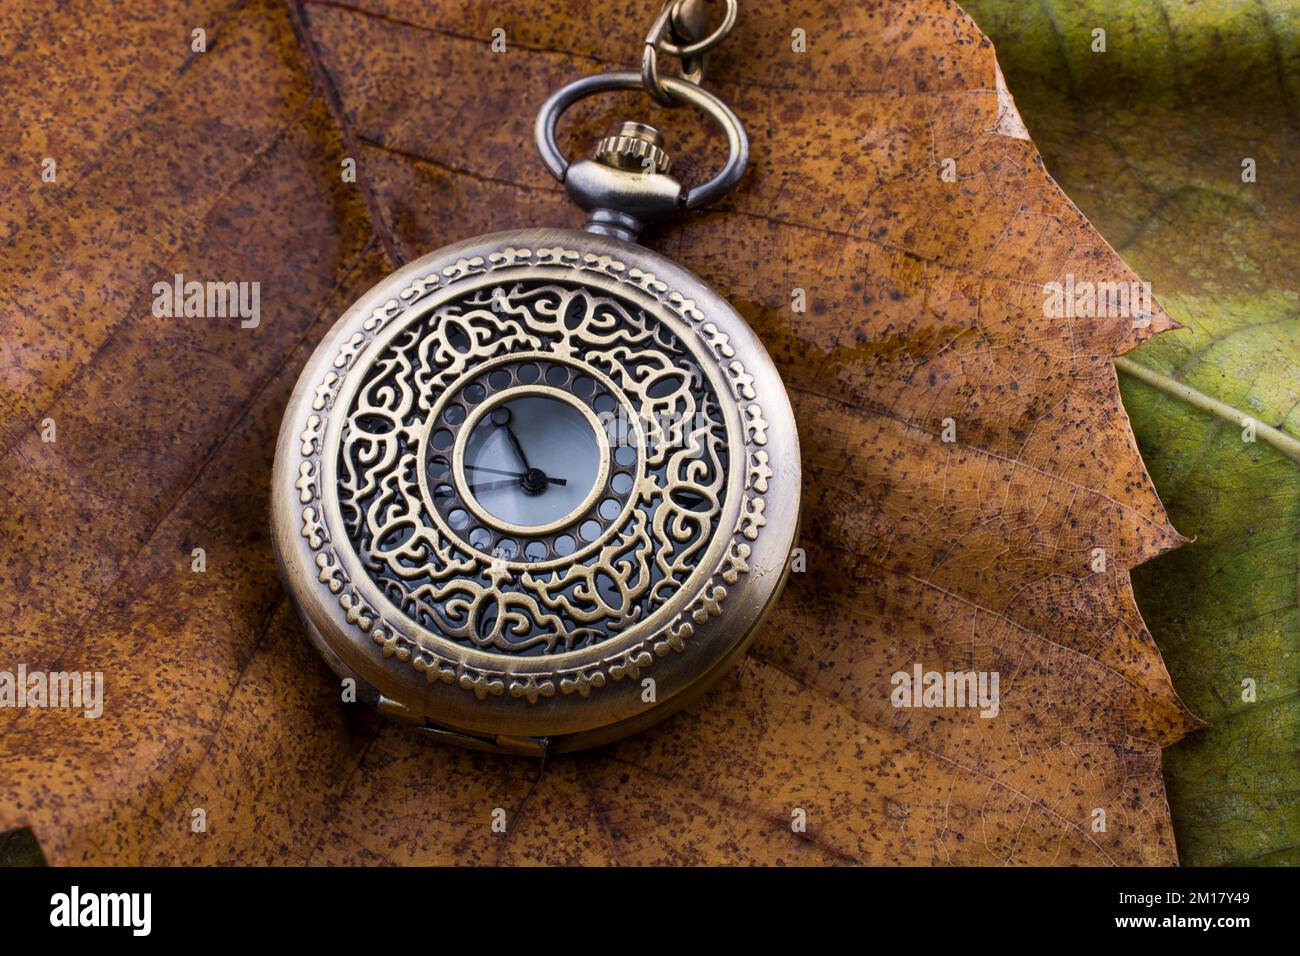 Retro style pocket watch placed on a dry leaves Stock Photo